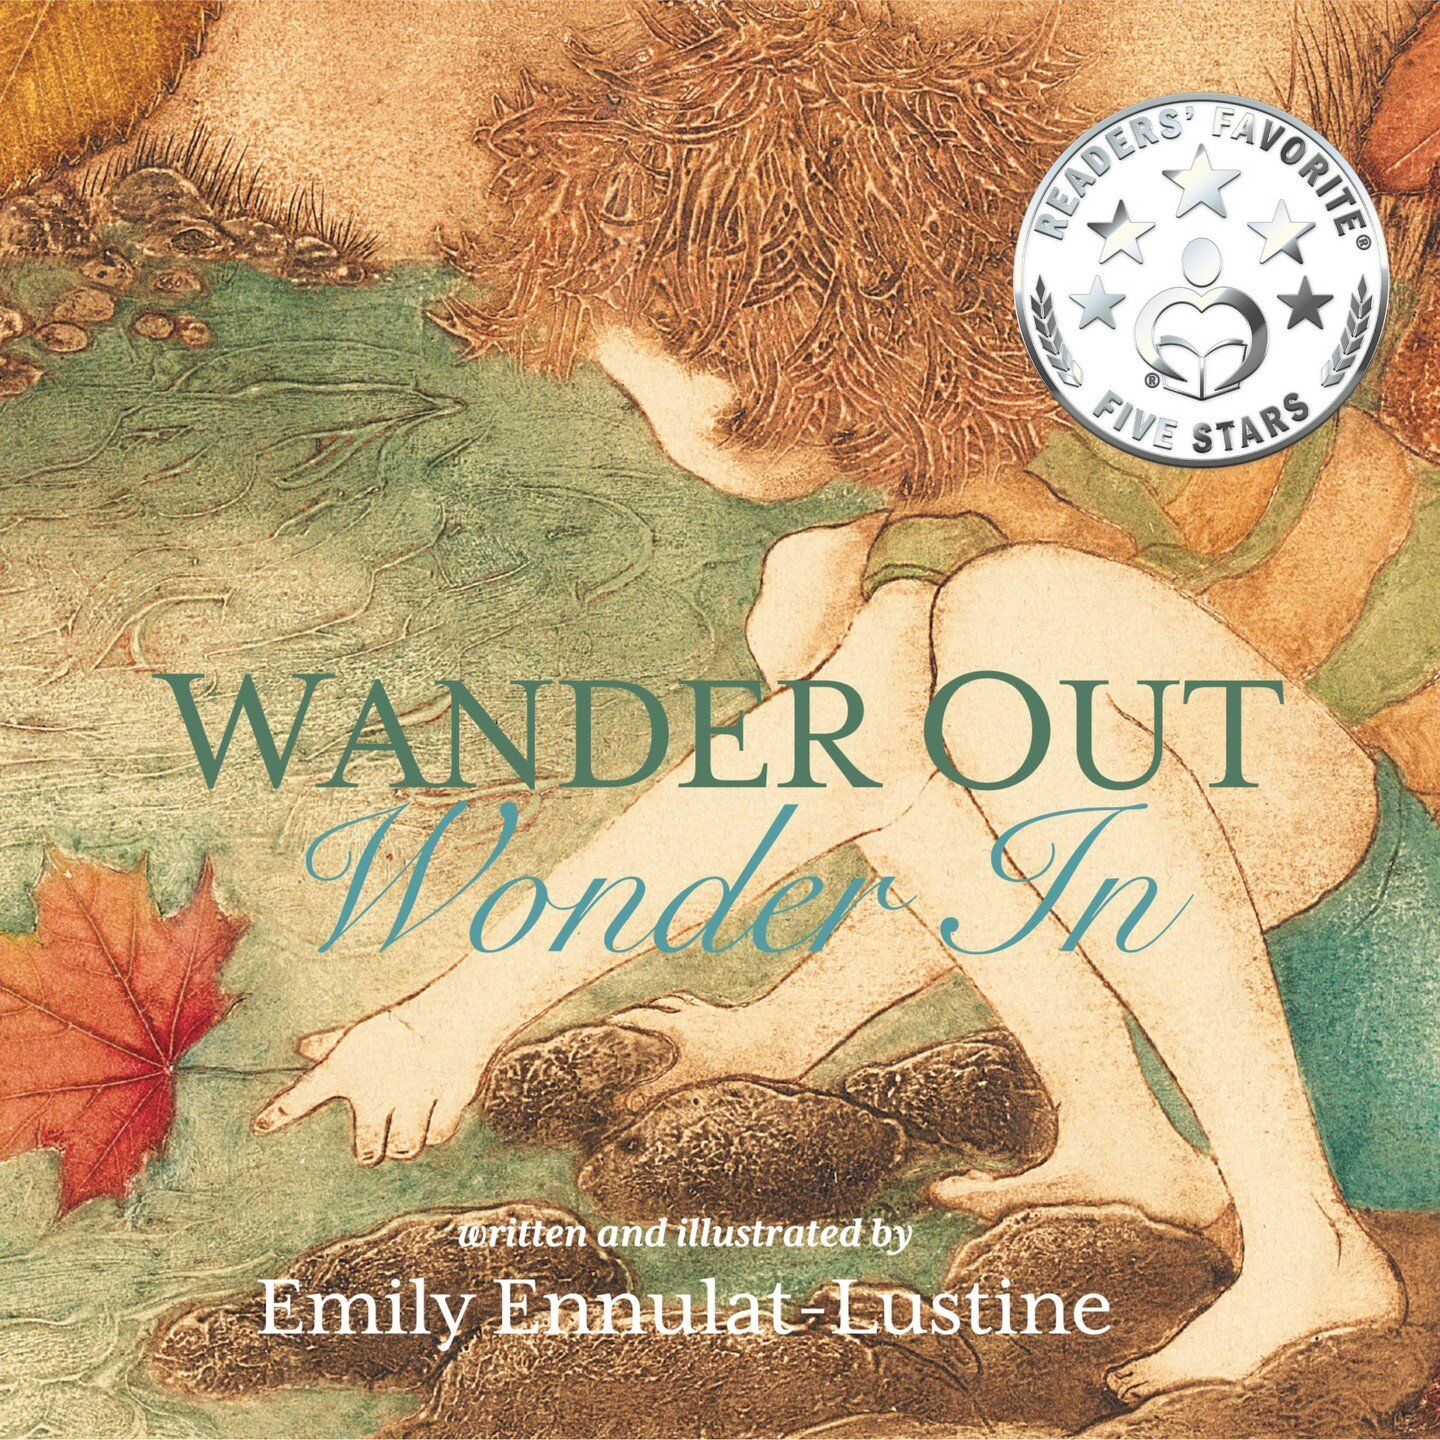 I am soooo excited to share my five star review for WANDER OUT, WONDER IN from @readersfavoritecom ! ⭐⭐⭐⭐⭐ 

&quot;Wander Out, Wonder In by Emily Ennulat-Lustine is a children&rsquo;s picture book about the wonders of nature. With technology becoming